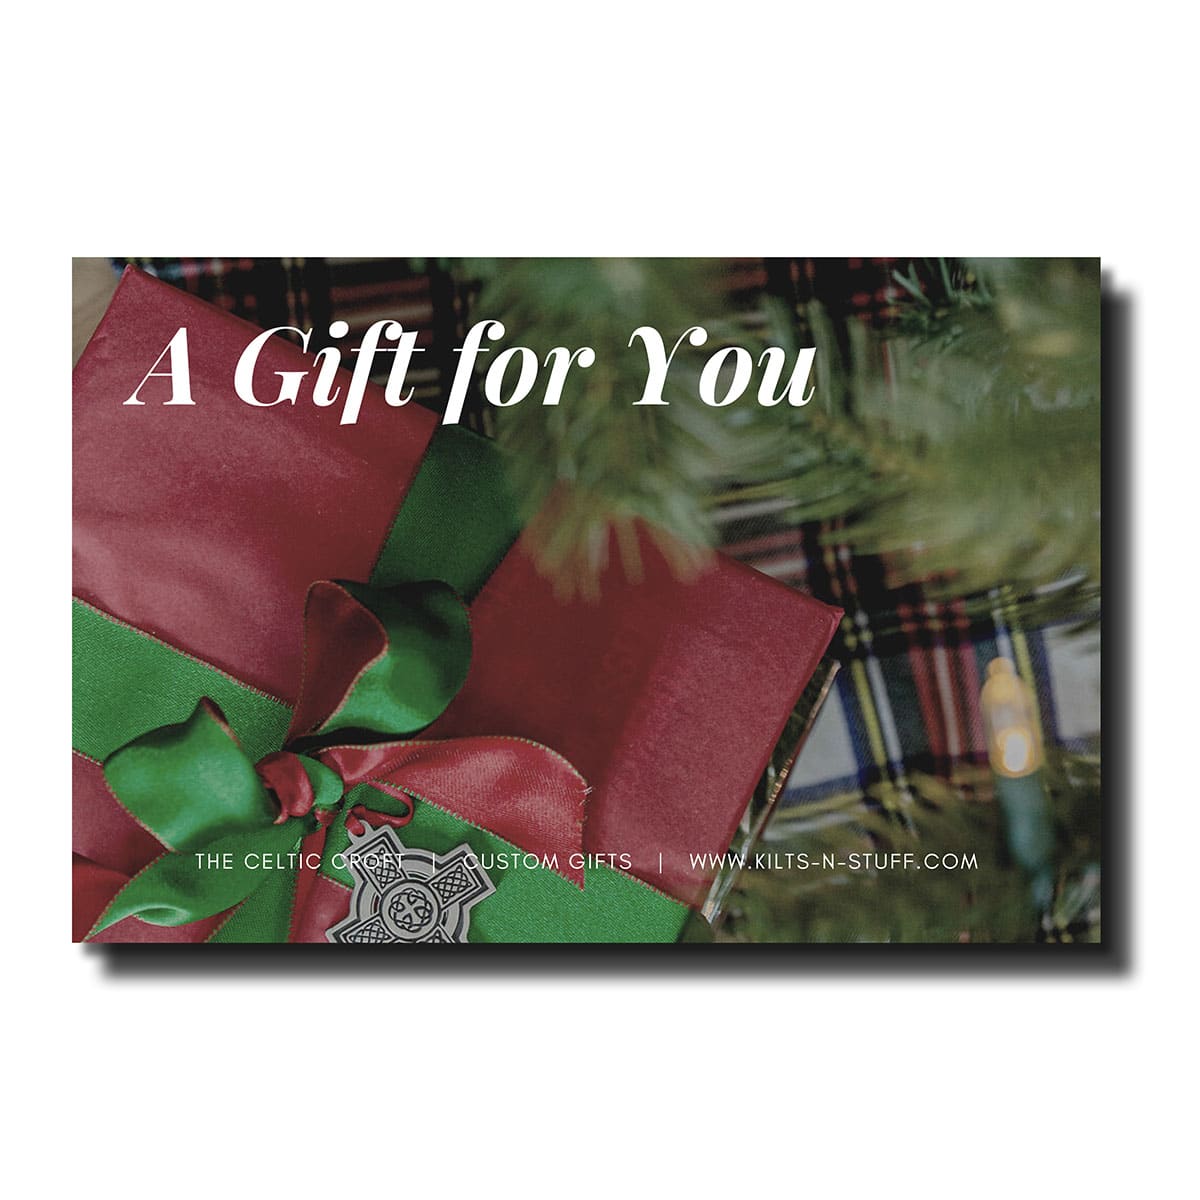 A Kilt Buying Experience - A gift for you.